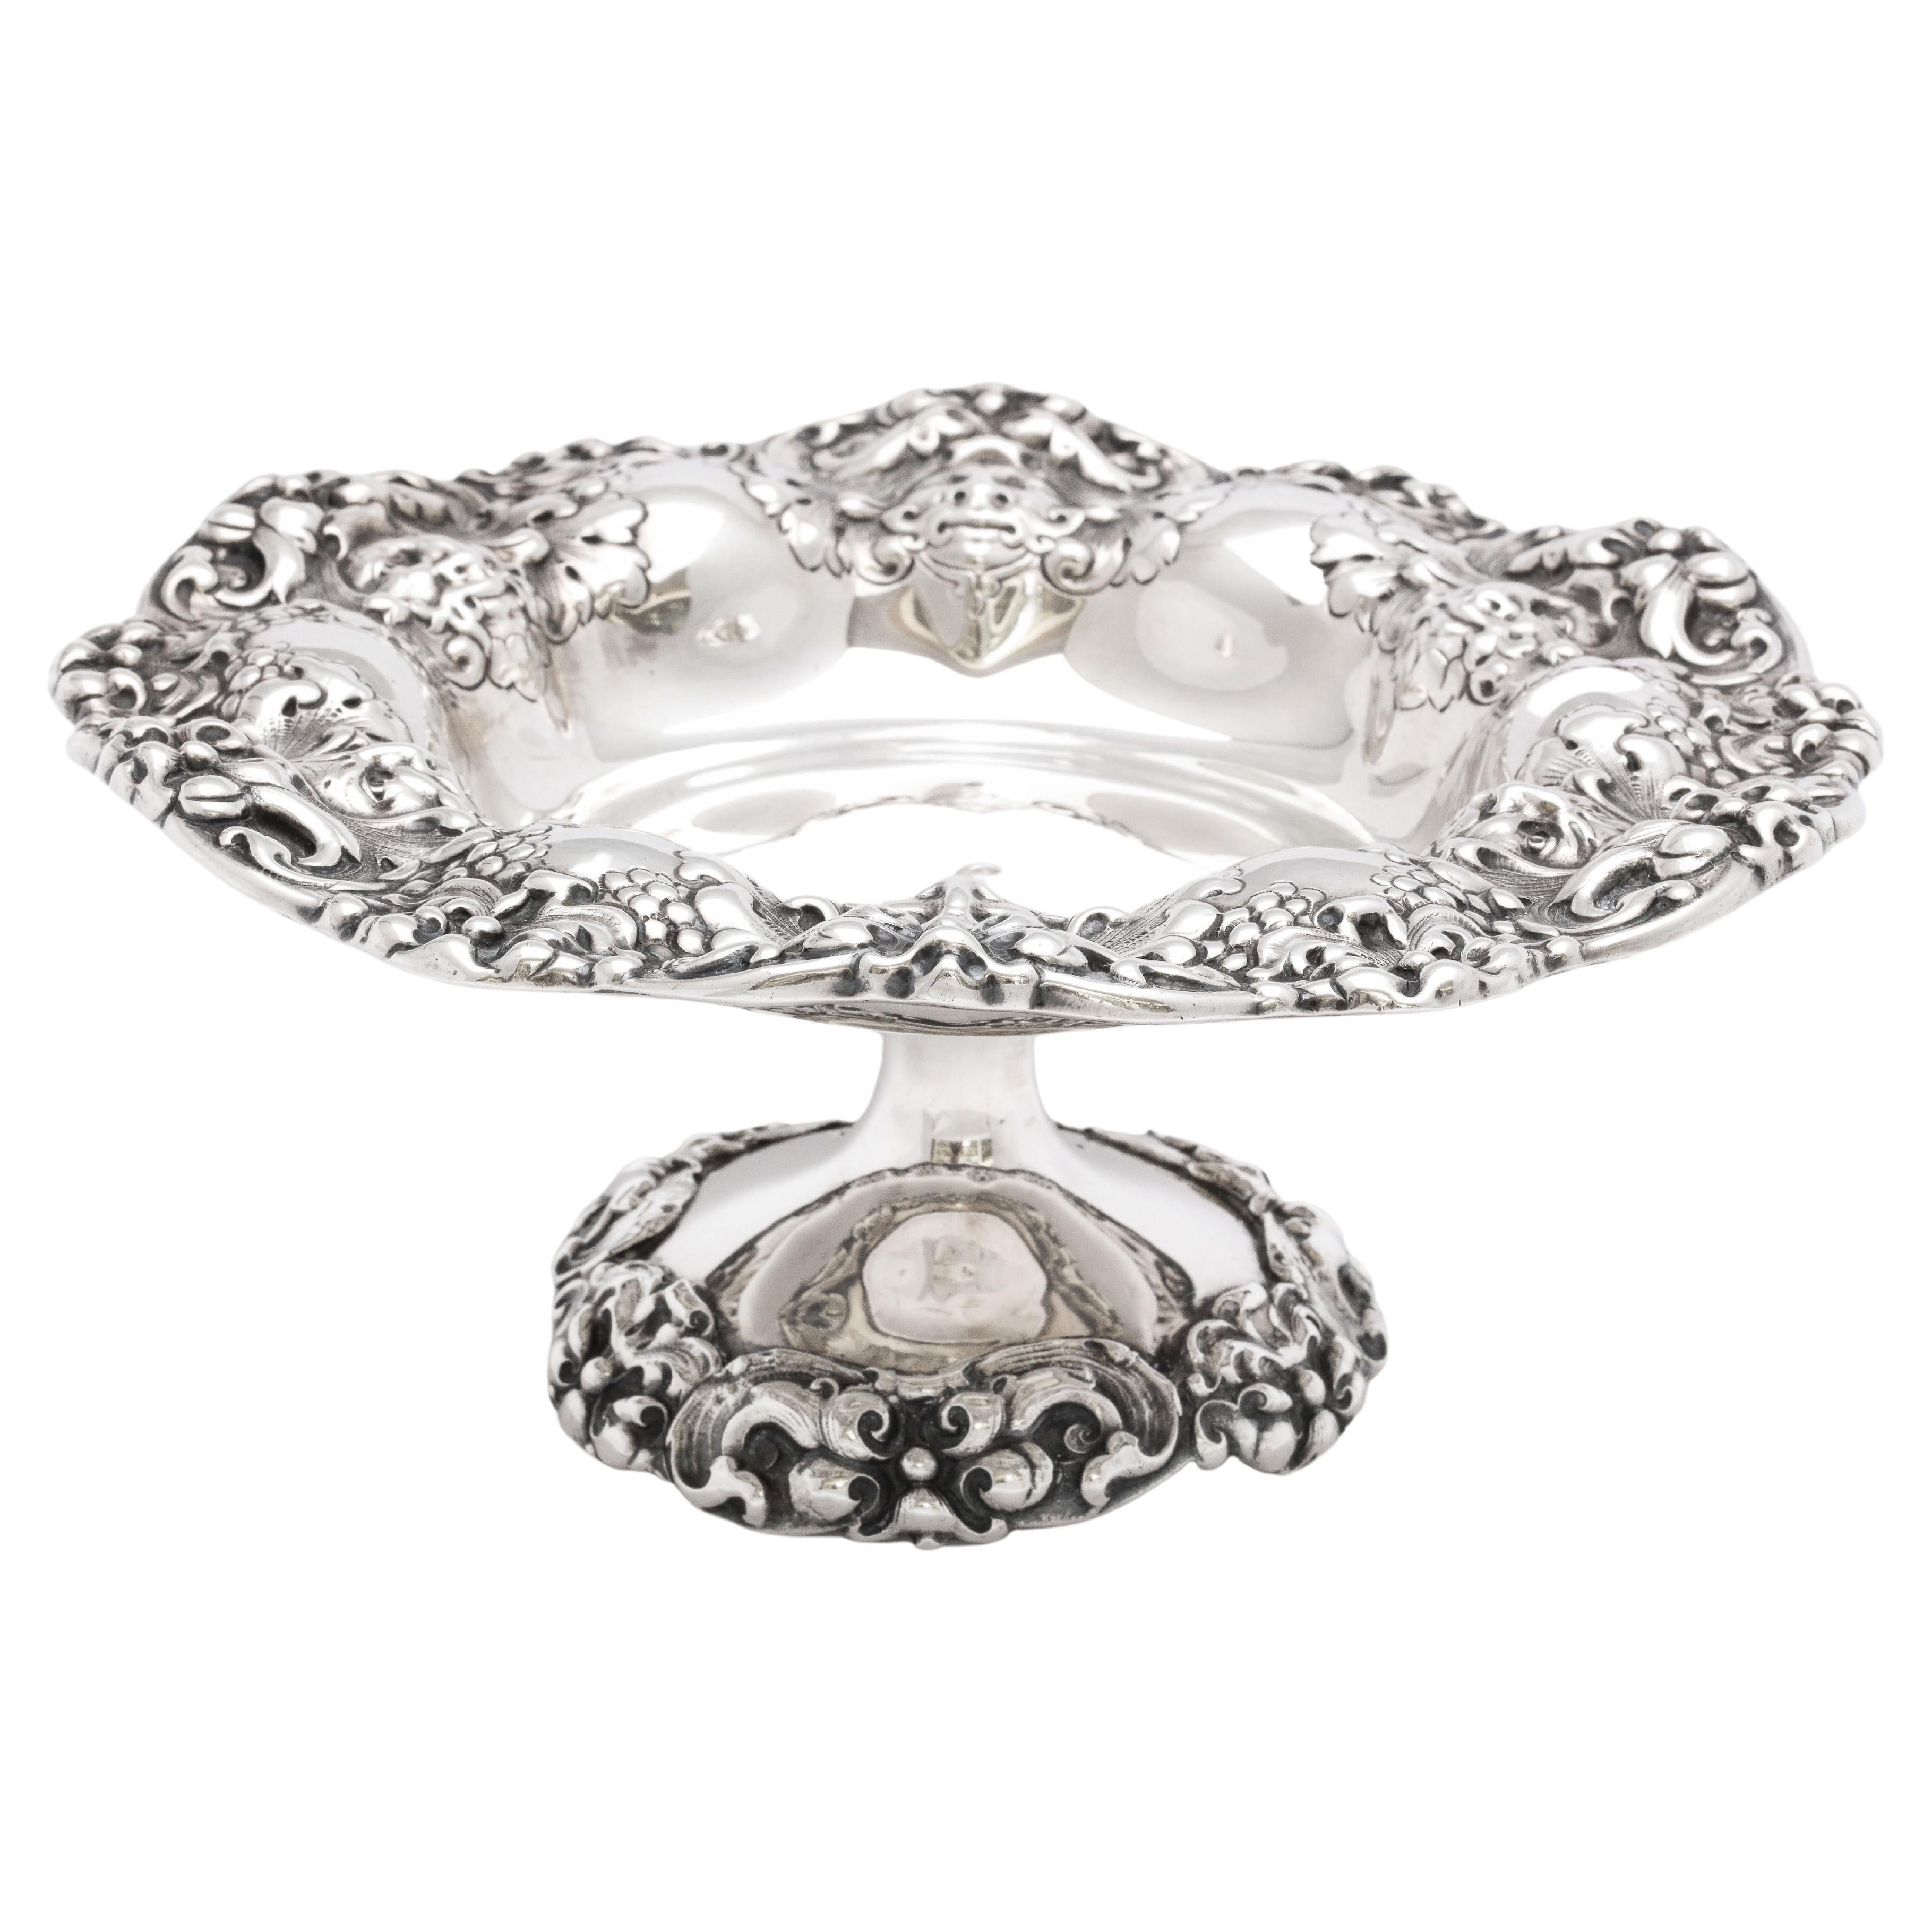 Neoclassical Style, Victorian Period Sterling Silver Tazza by Gorham